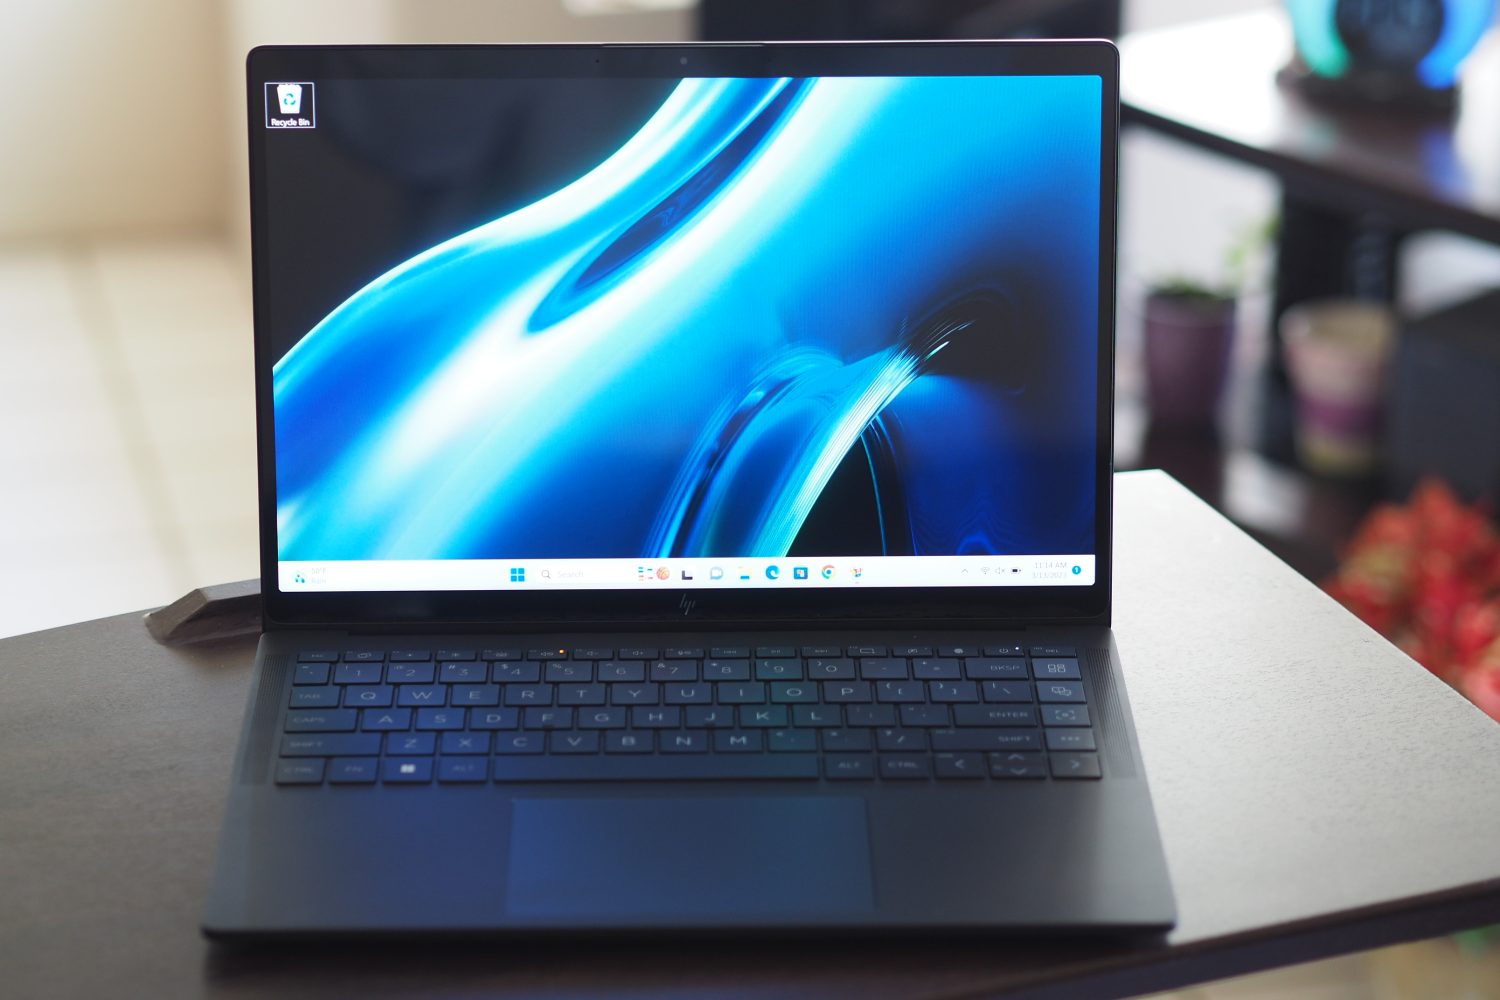 This Windows laptop has the best battery life in 2023